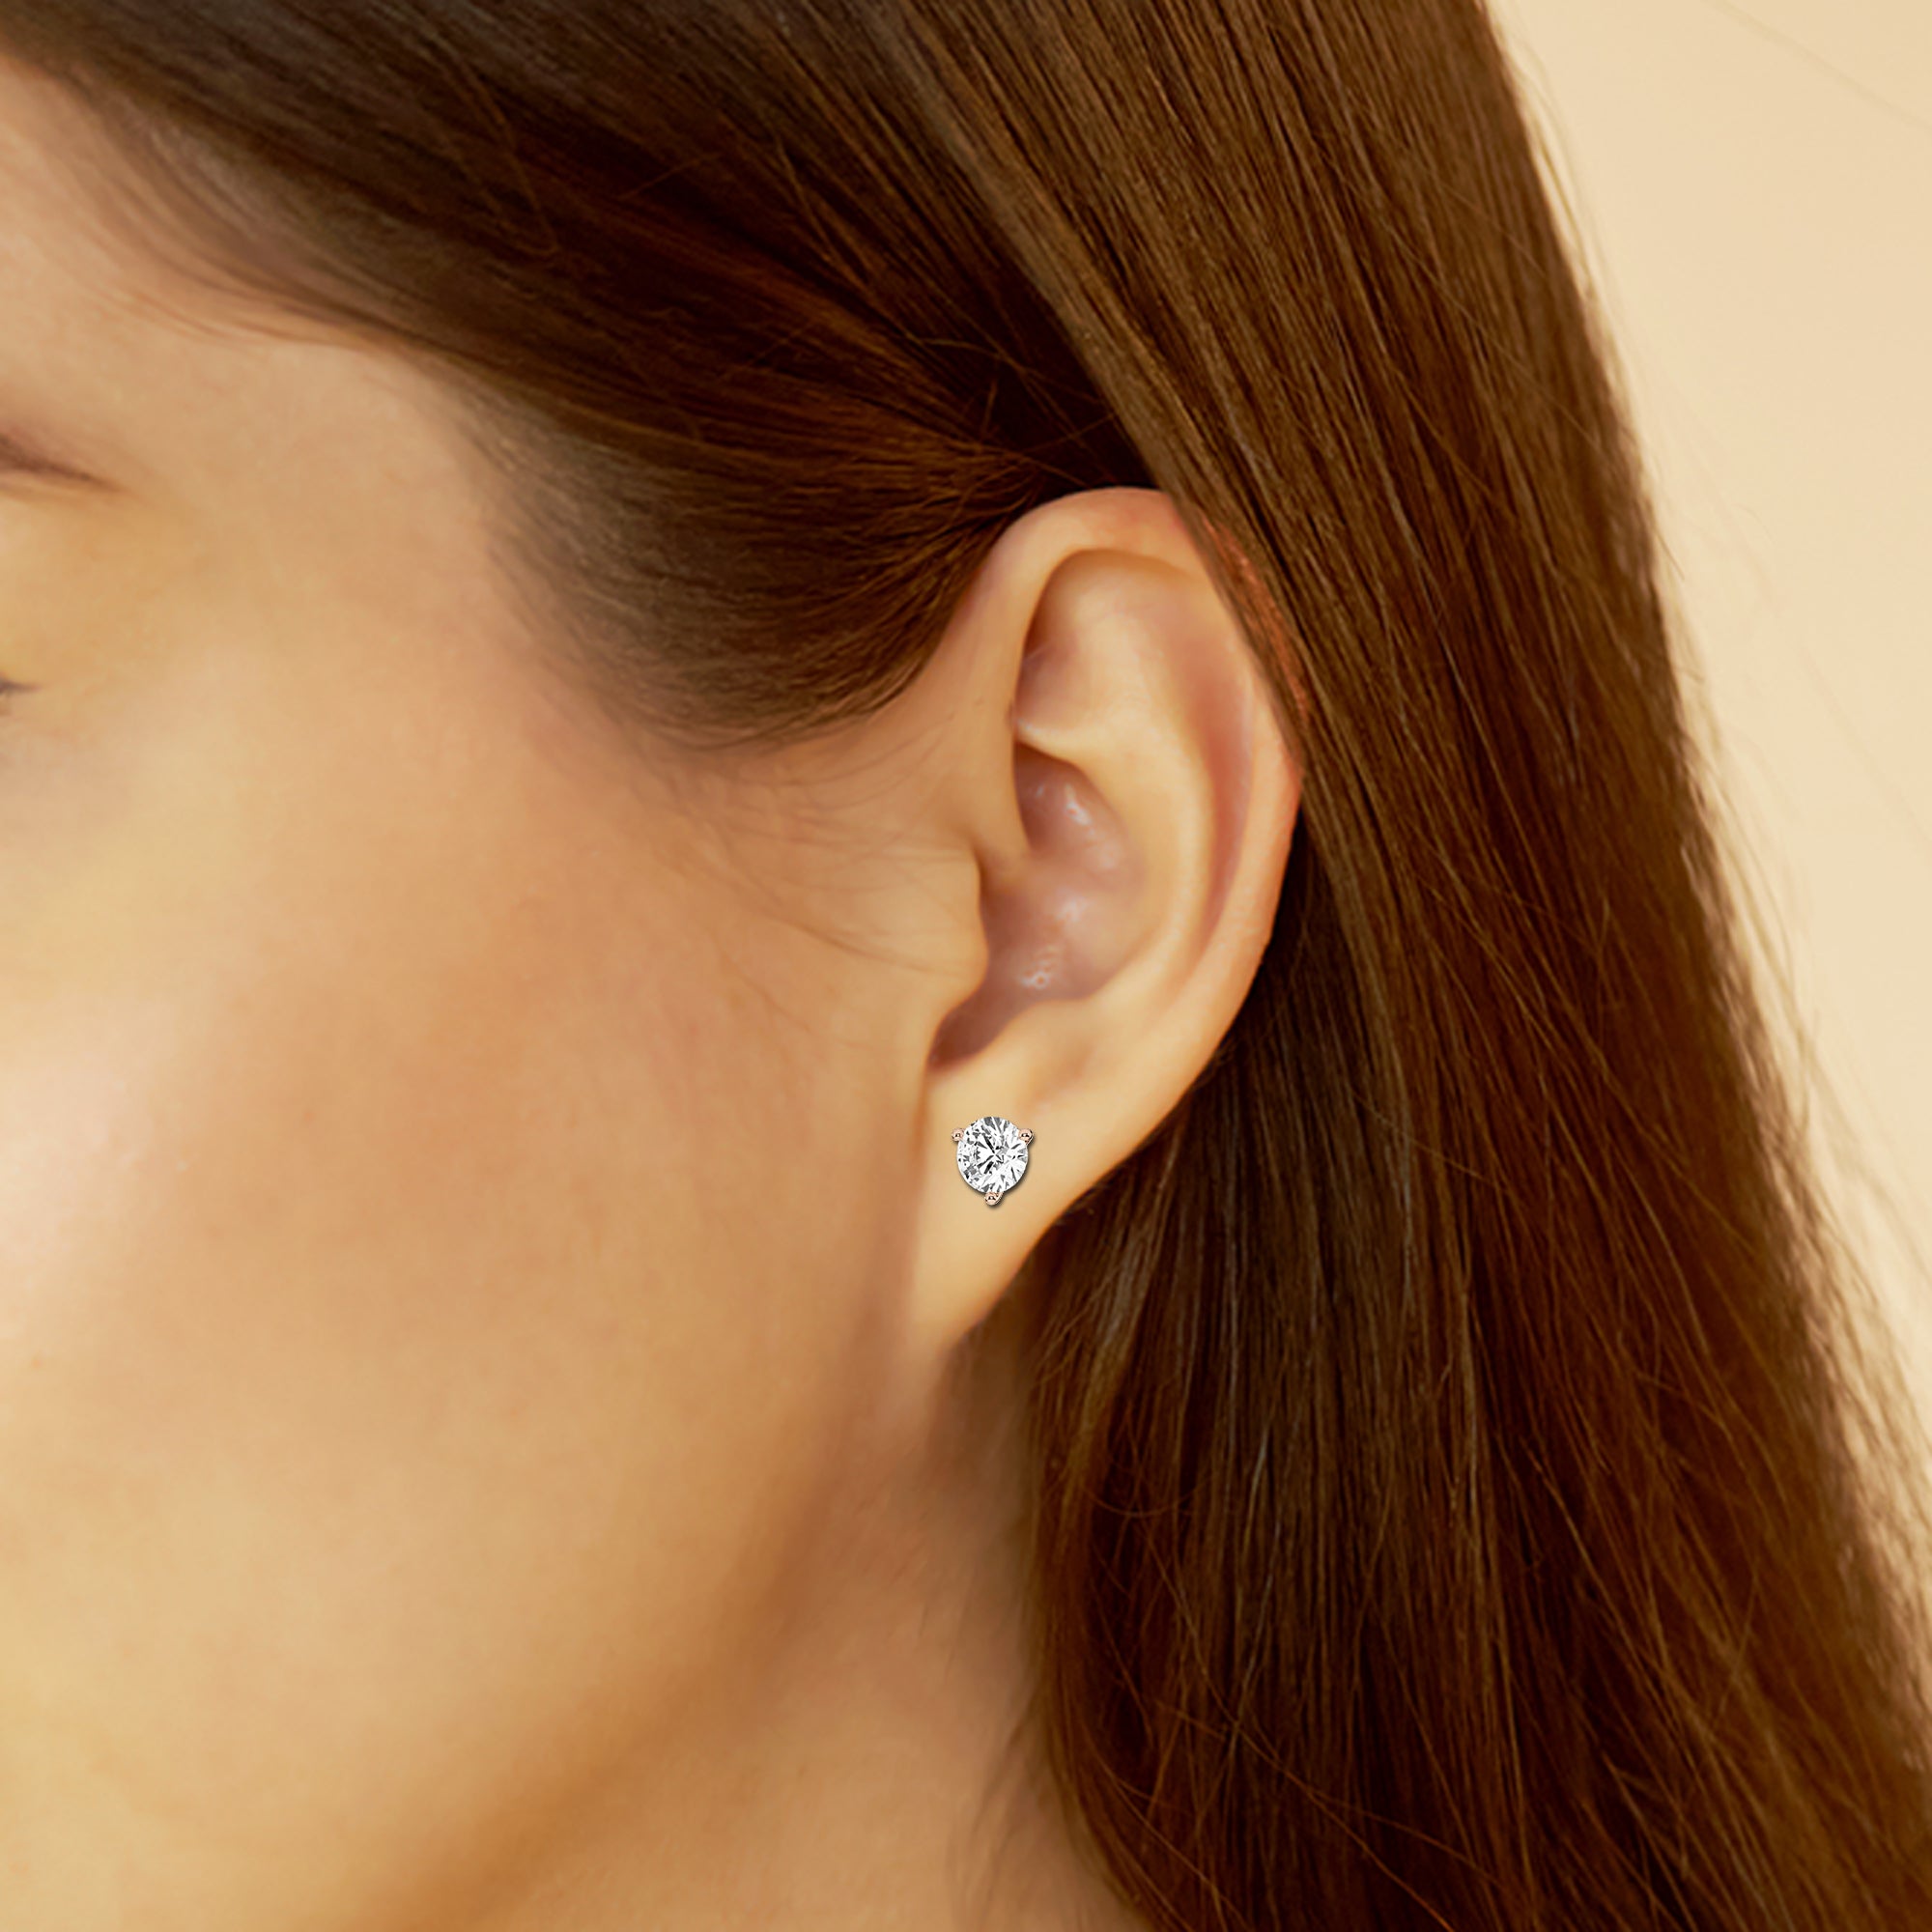 woman wearing White gold stud earrings featuring 1.5 carat lab-grown round diamonds